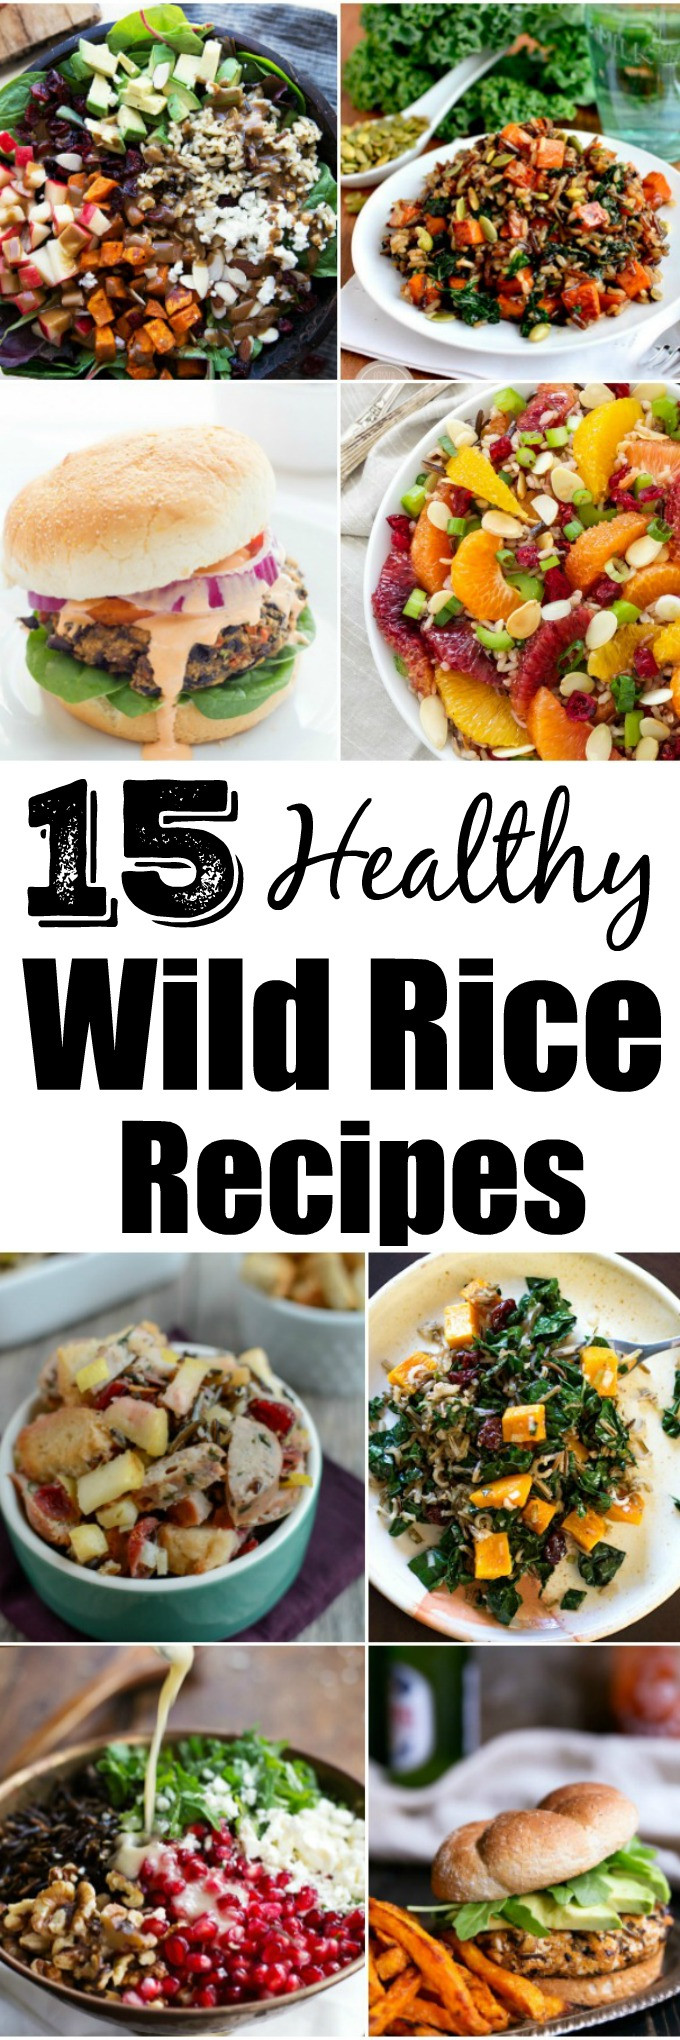 Is Wild Rice Healthy
 15 Healthy Wild Rice Recipes